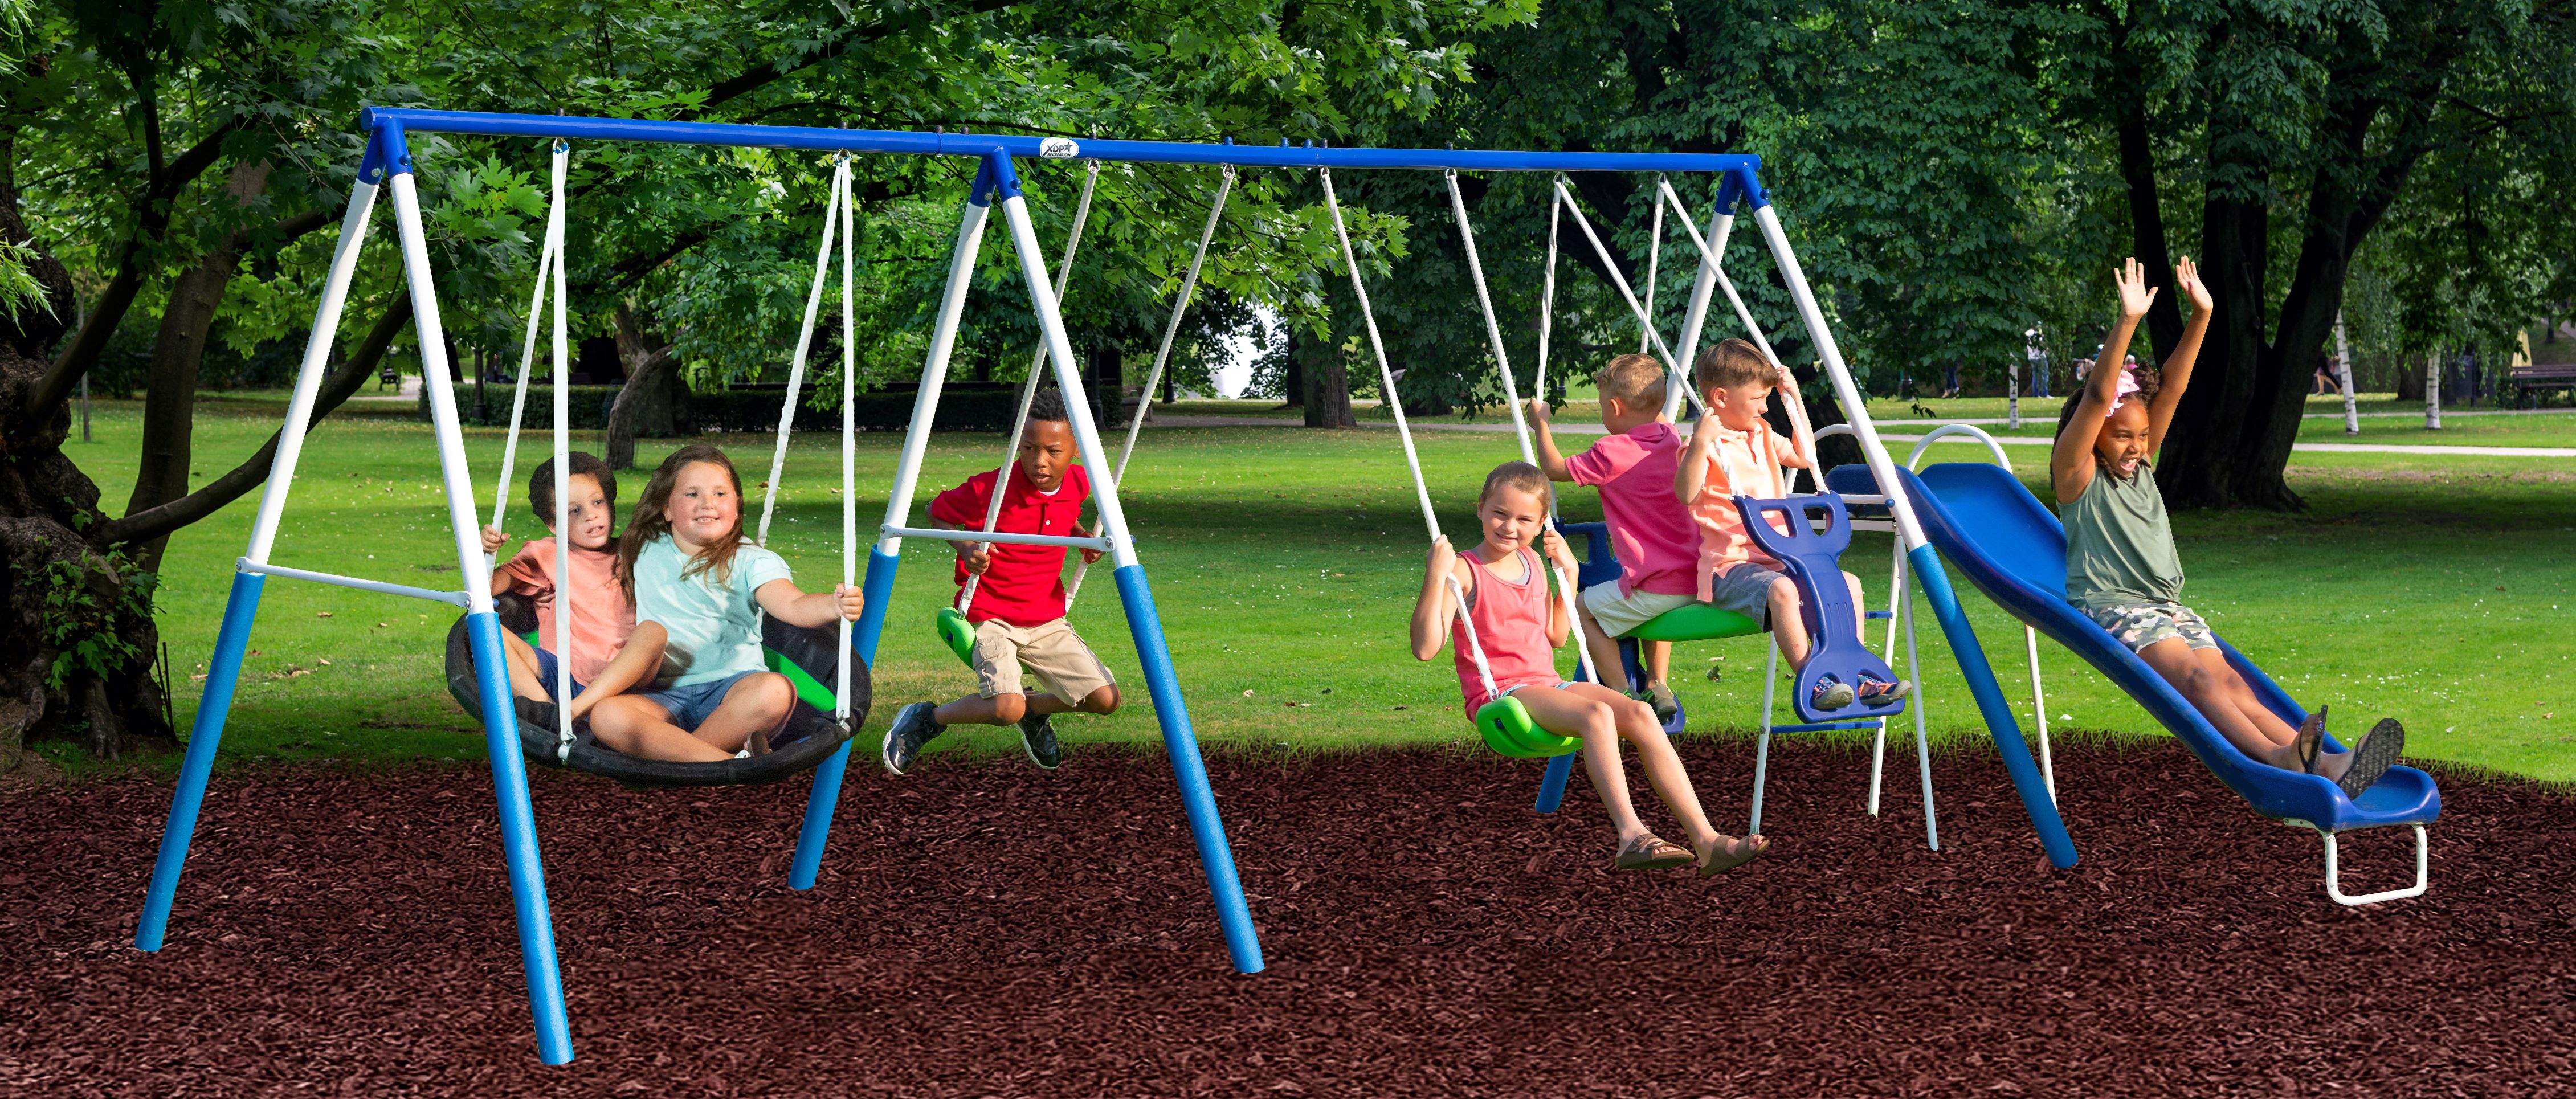 XDP Recreation All Star Playground Metal Swing Set for up to 7 Children - image 3 of 13